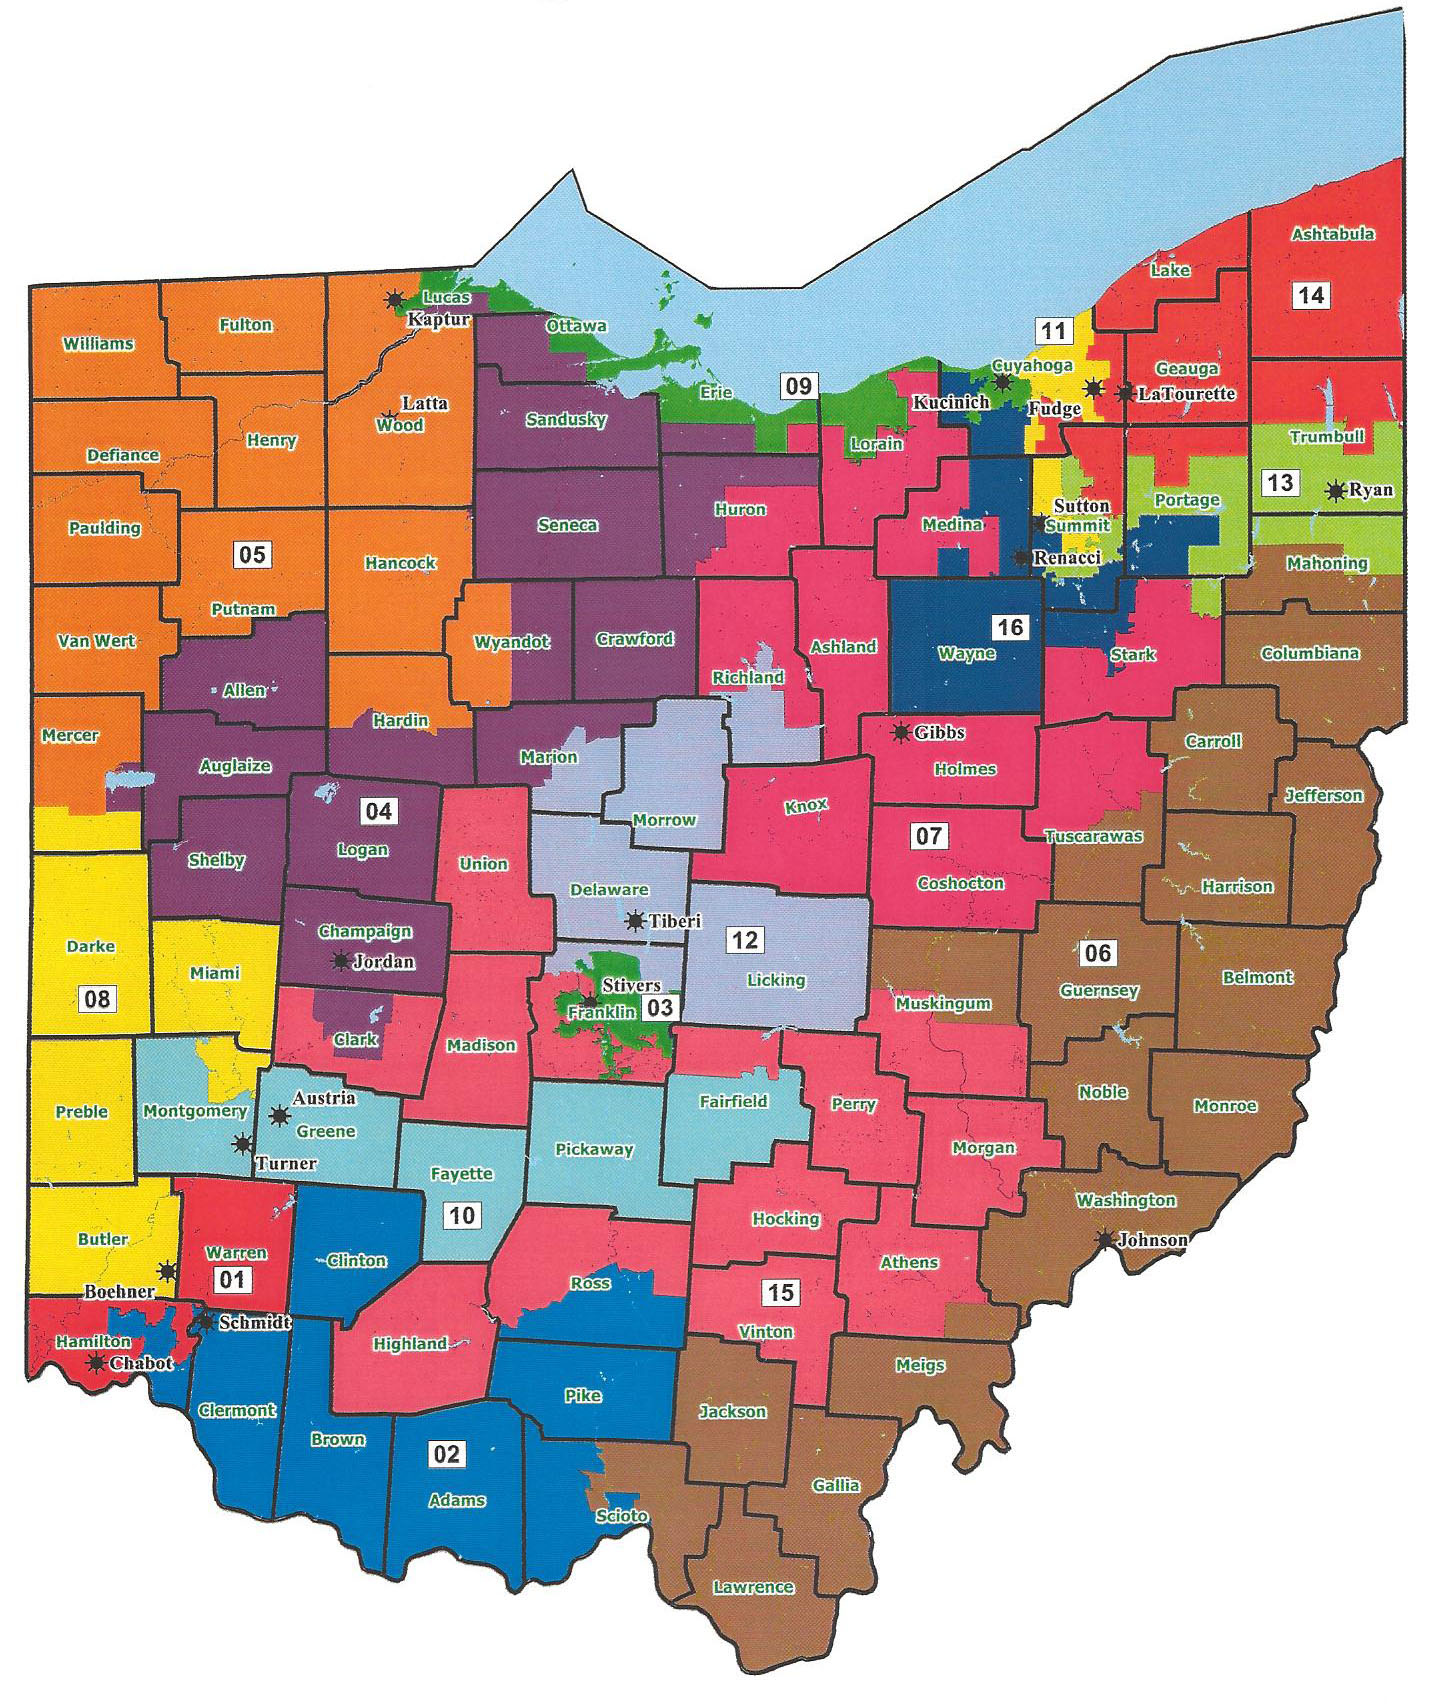 Republican-drawn congressional map clears Ohio House amid Democrats' complaints - The ...1440 x 1708